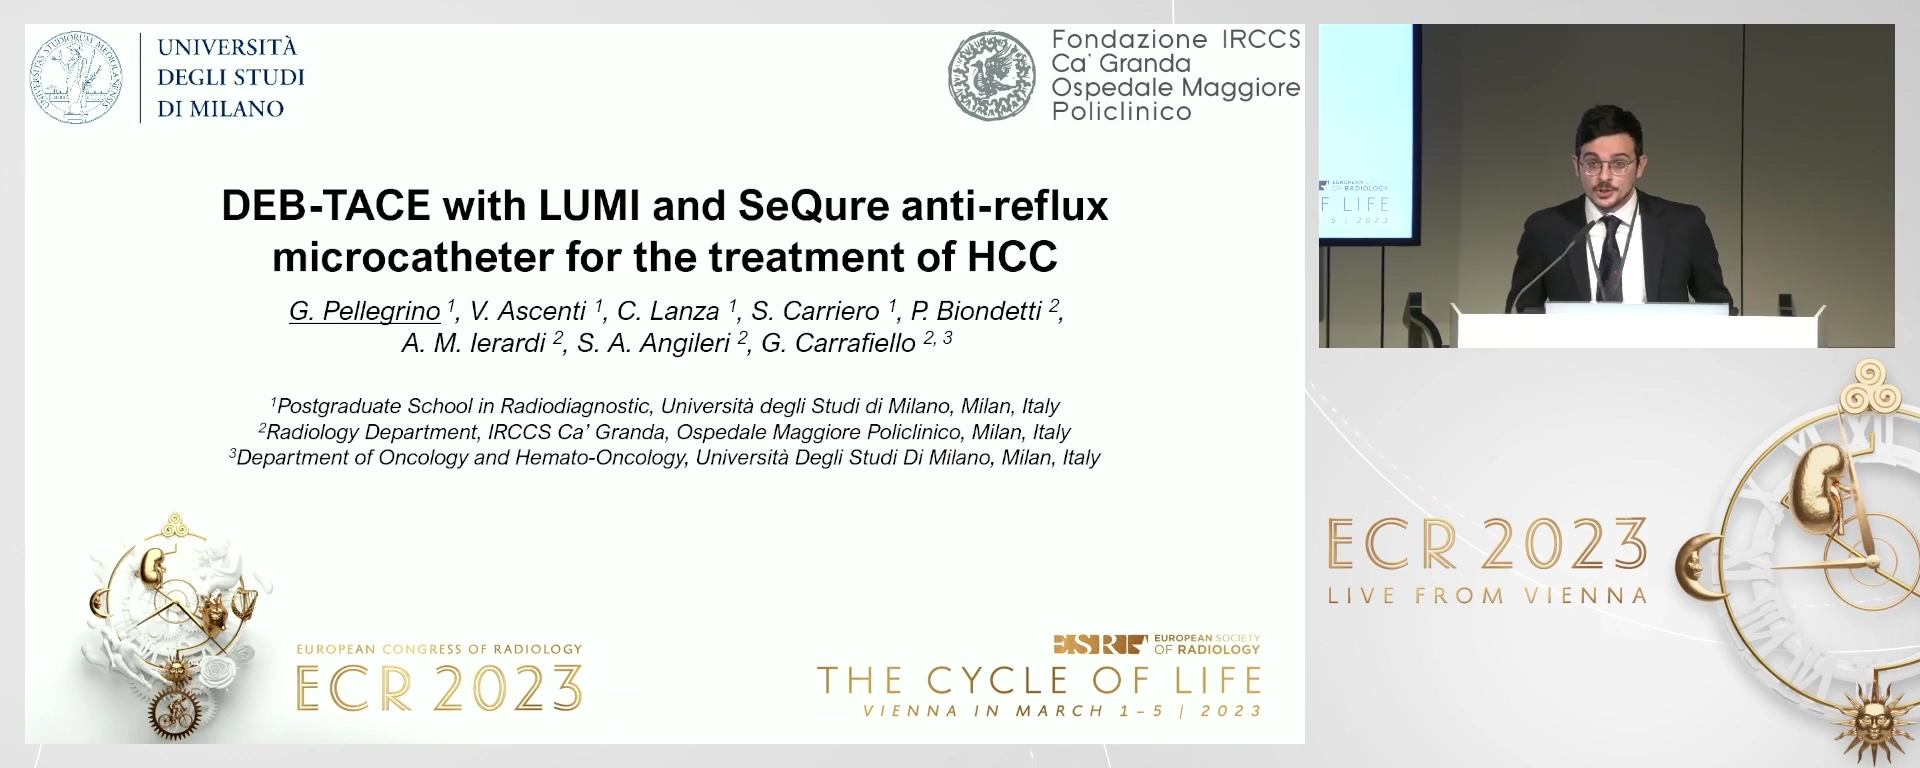 DEB-TACE with LUMI and SeQure anti-reflux microcatheter for the treatment of HCC